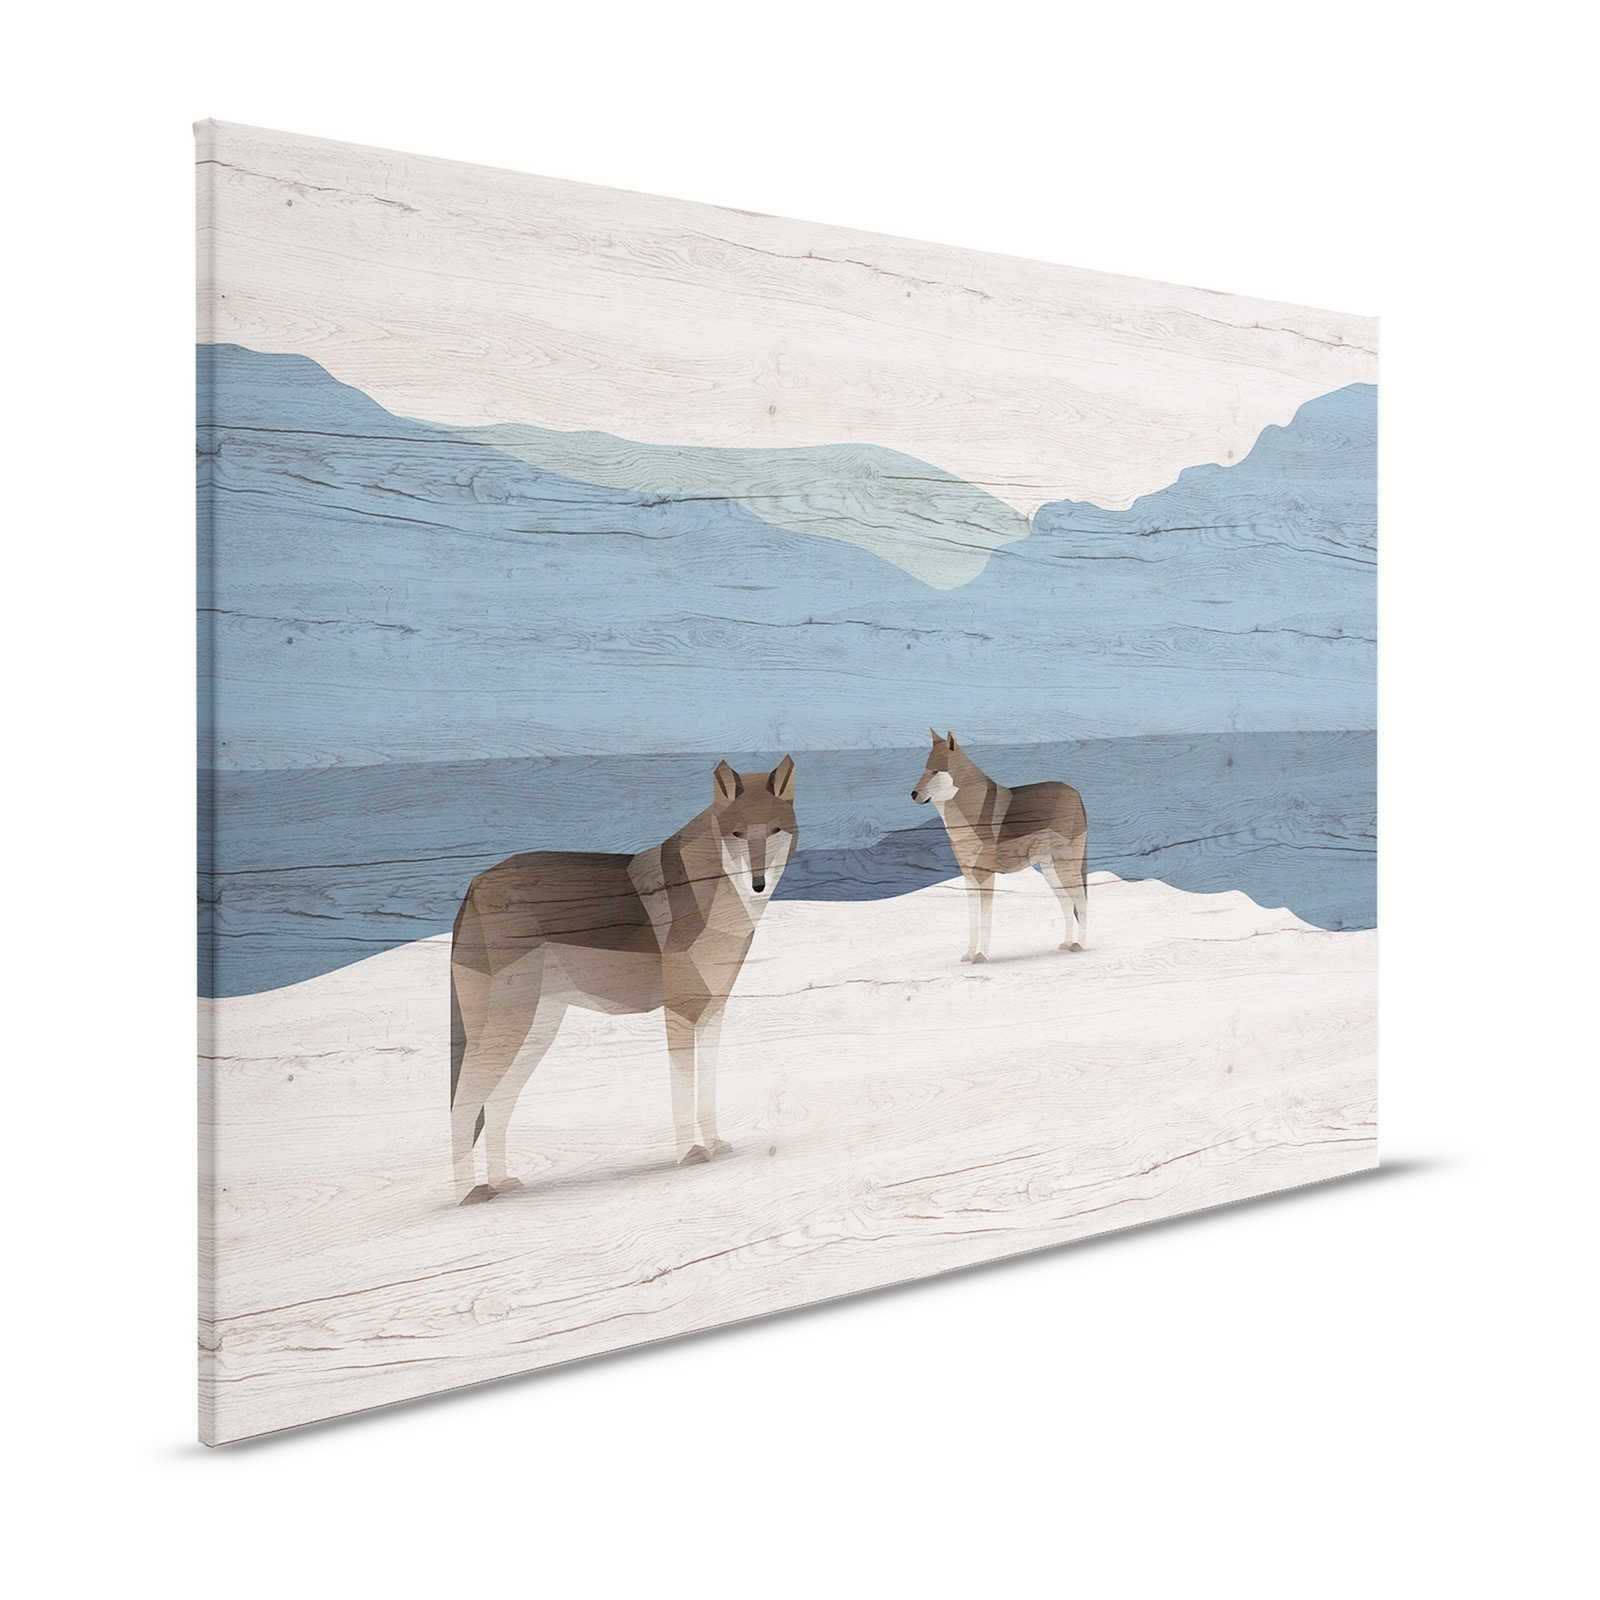 Yukon 1 - Canvas painting Mountains & Dogs with wood texture - 1.20 m x 0.80 m
